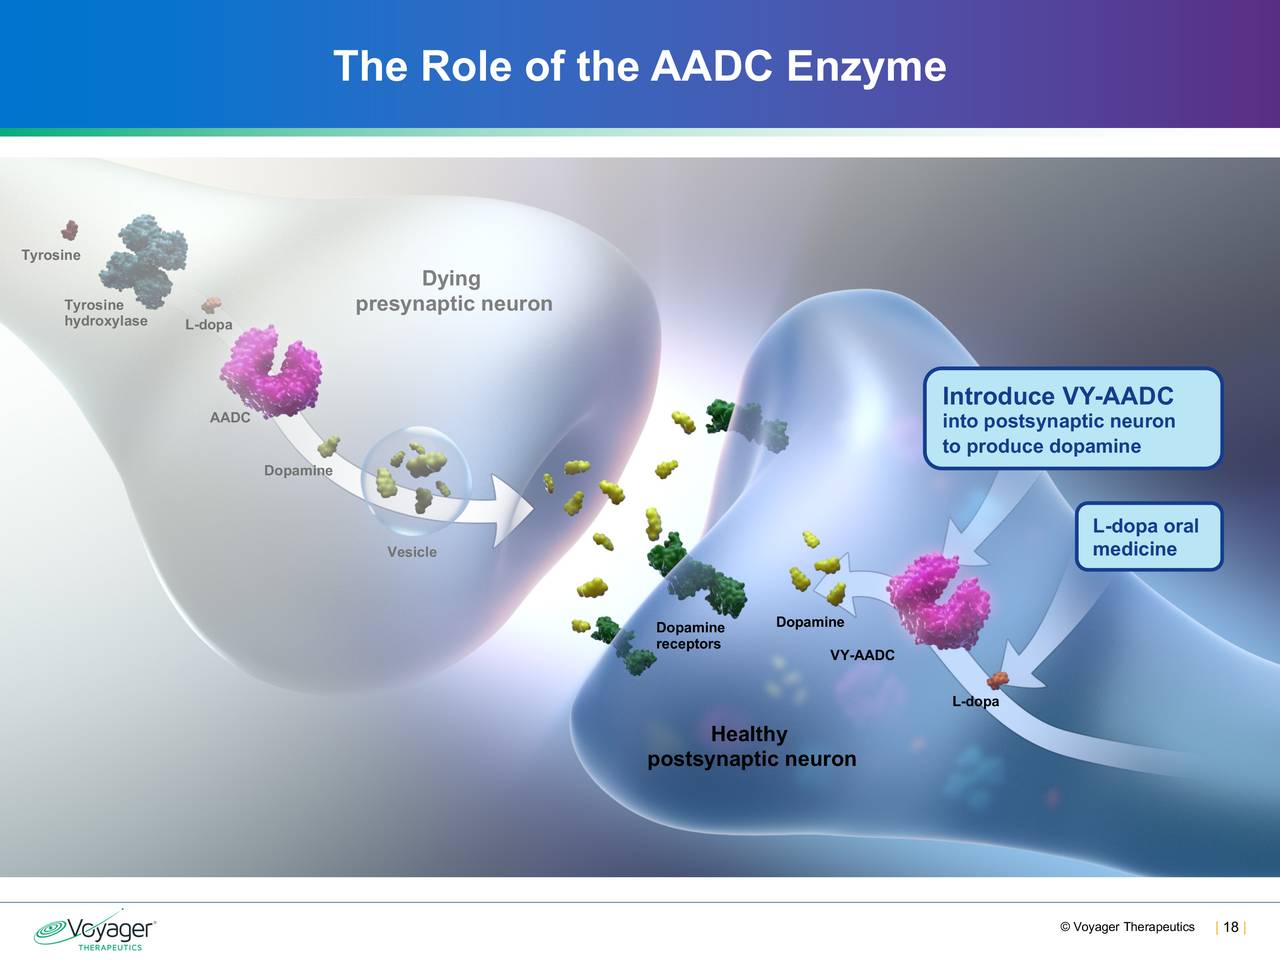 The Role of the AADC Enzyme